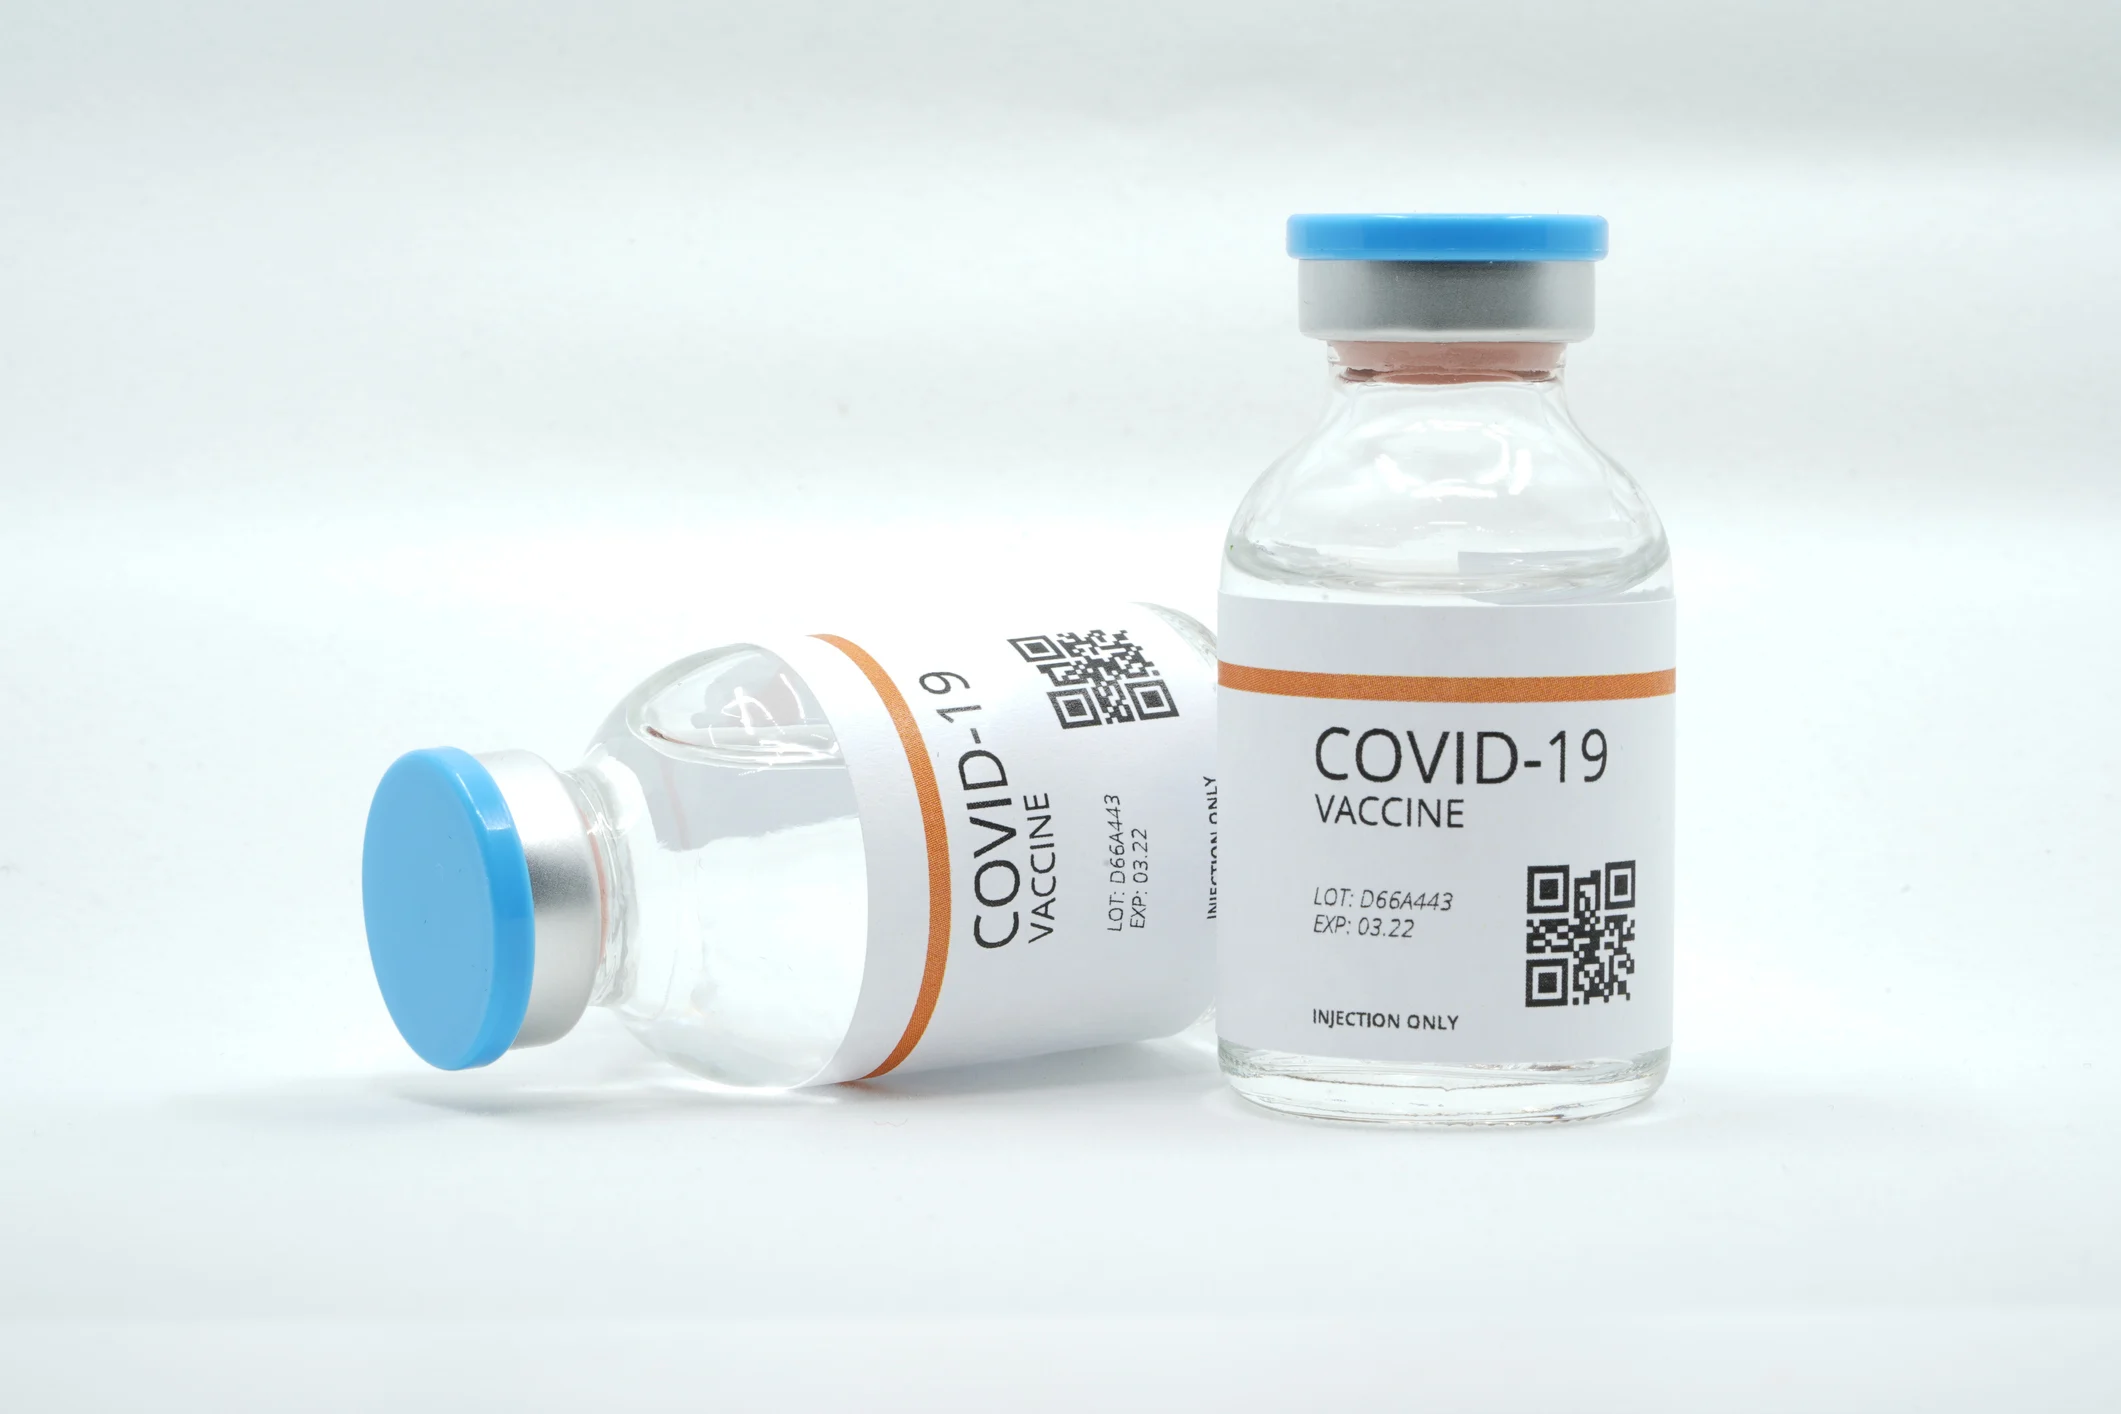 Two COVID vaccine bottles